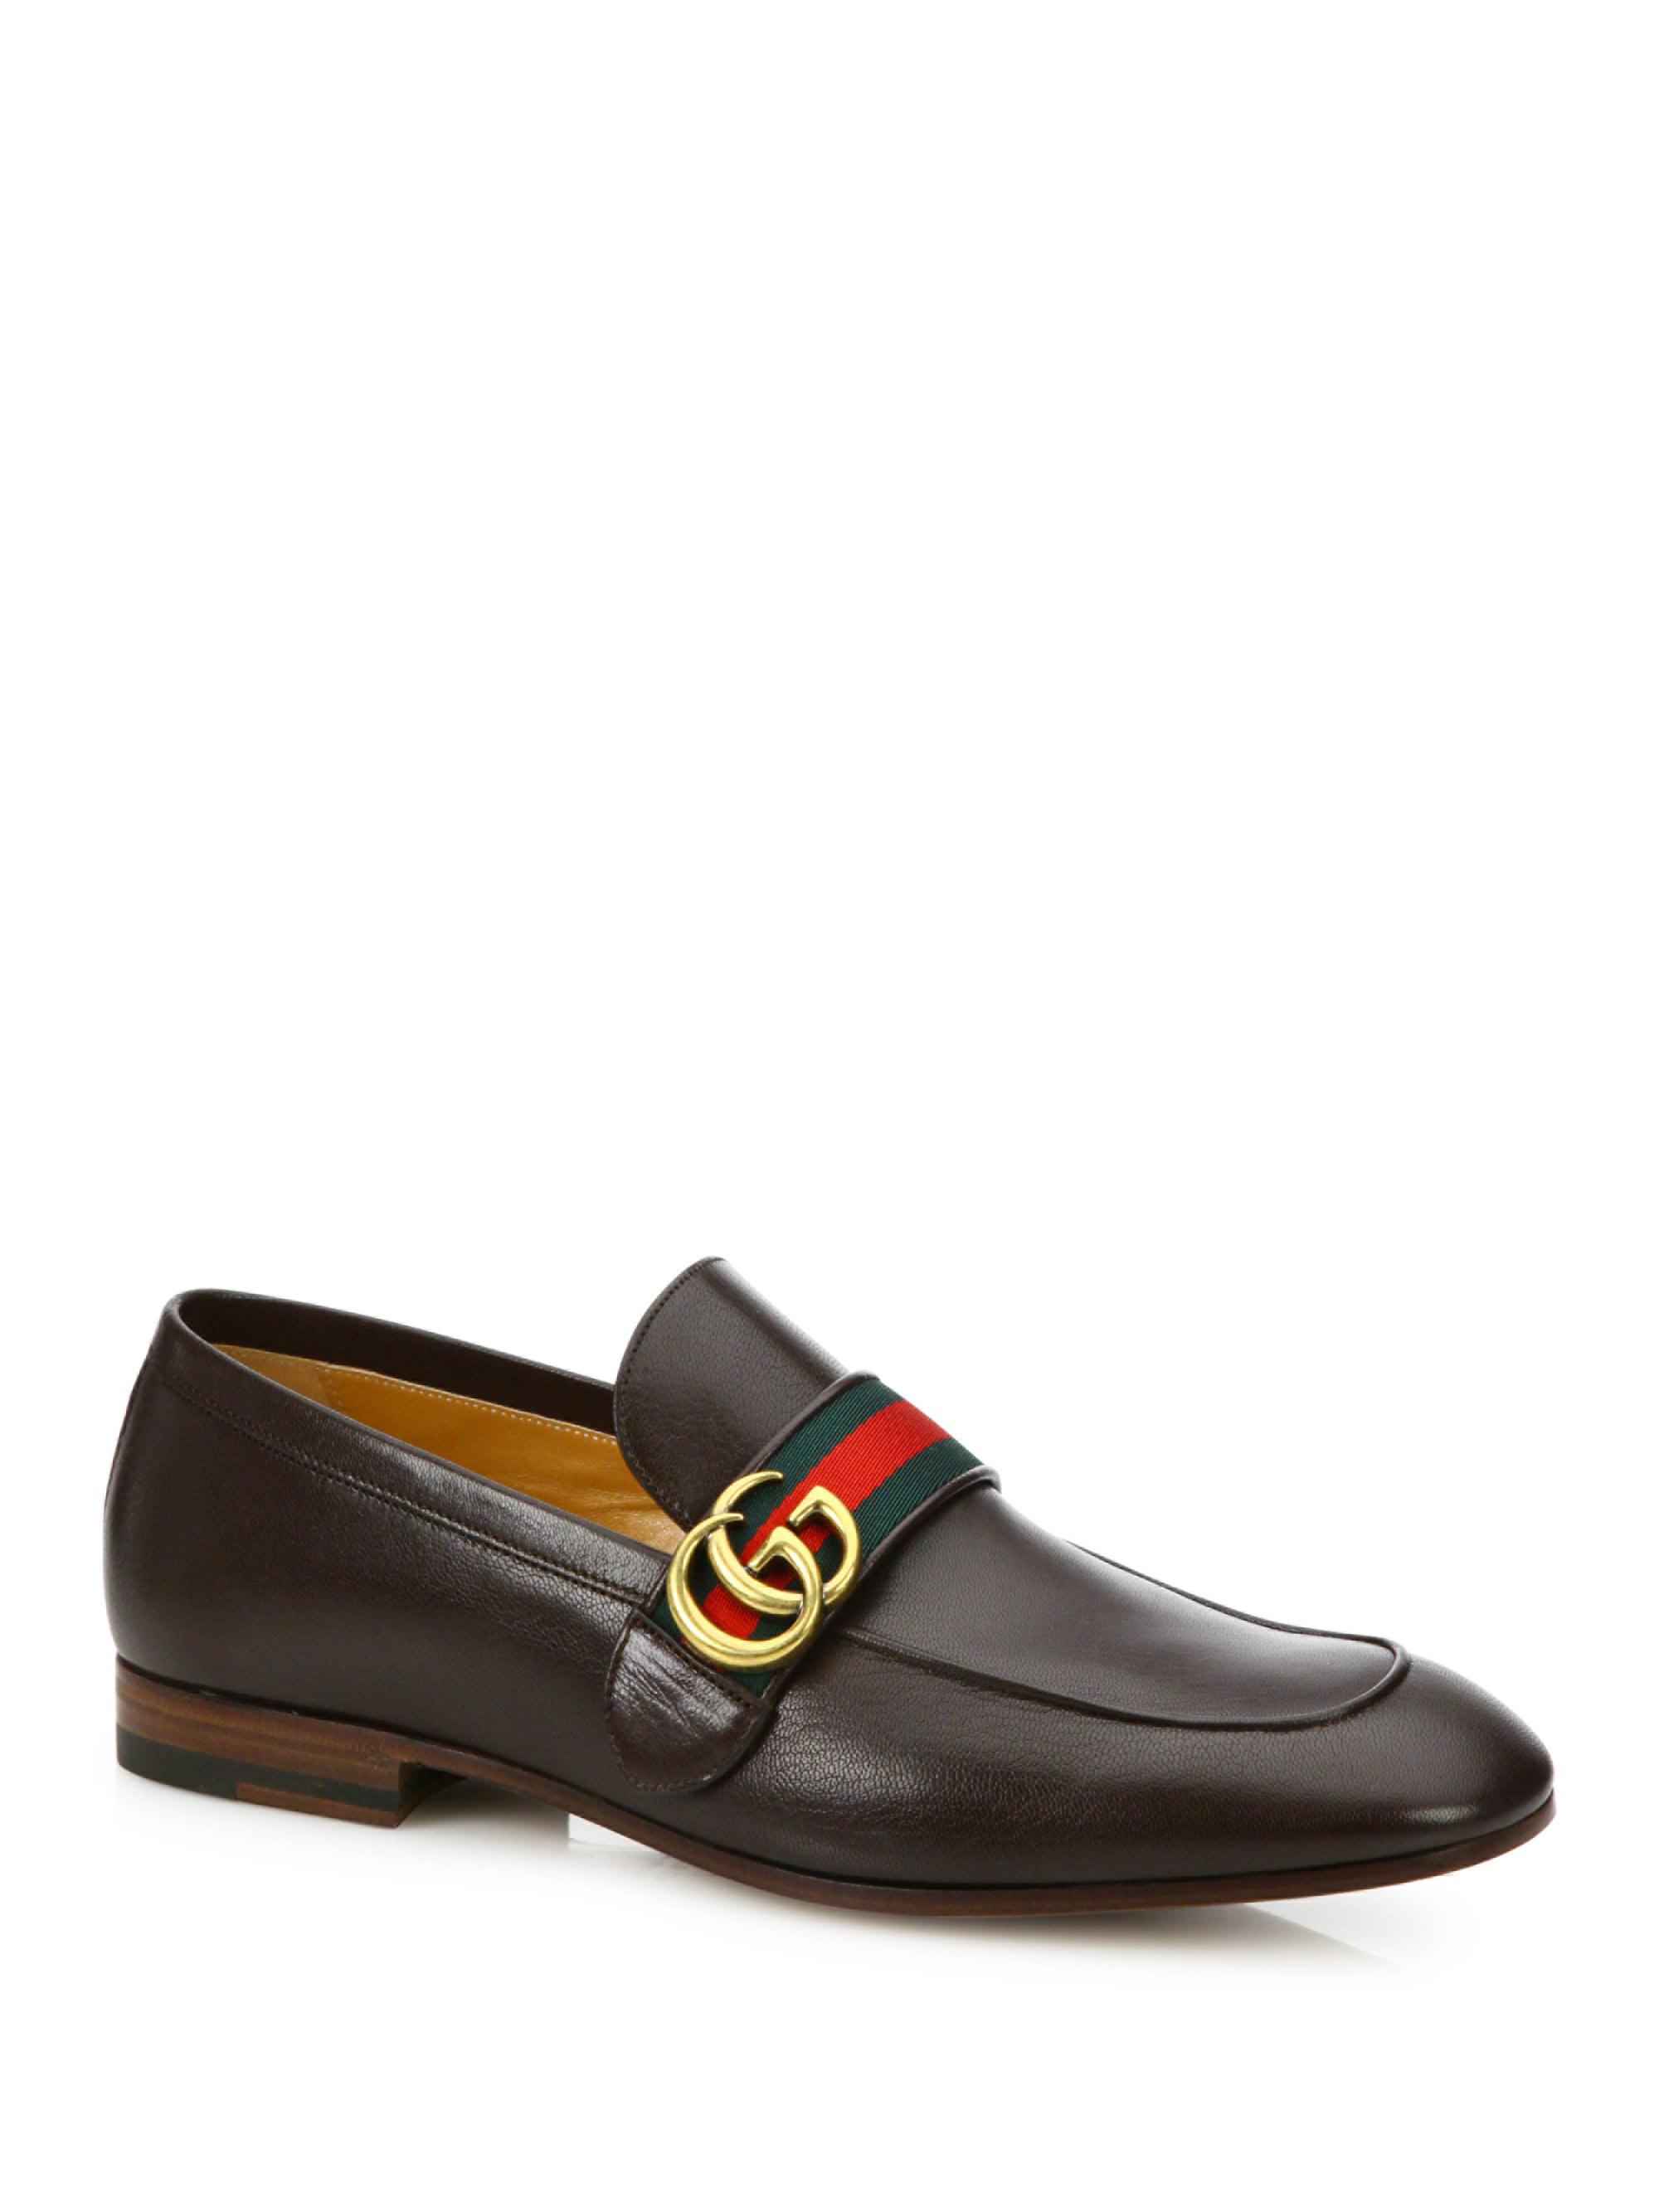 Lyst - Gucci Brown Gg Web Leather Loafers in Brown for Men - Save 4. ...